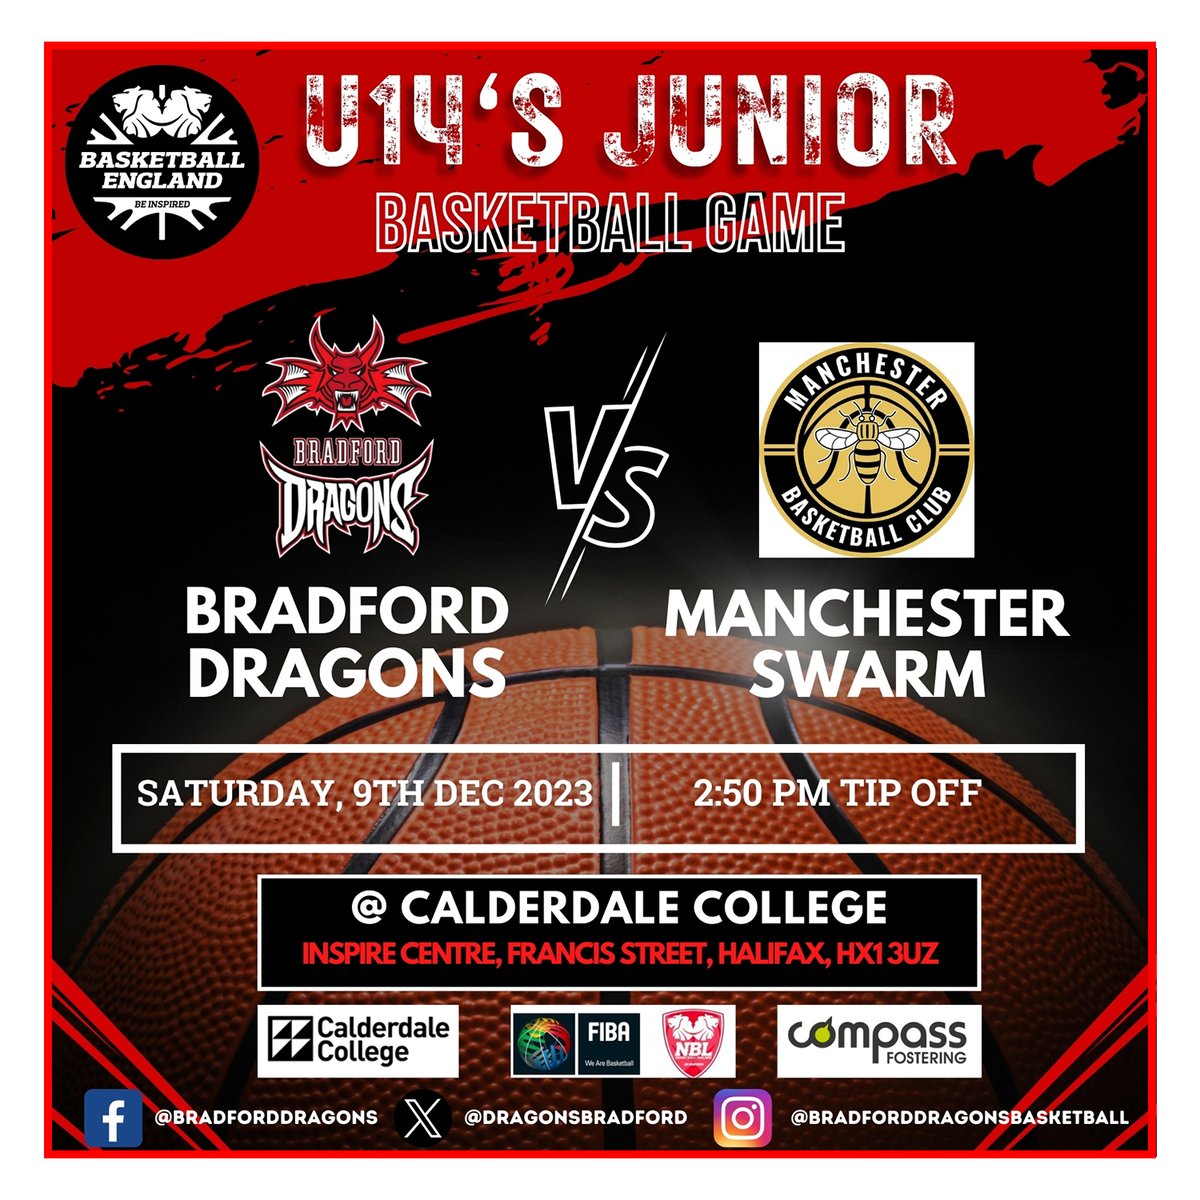 It was a defeat for our under 14s at the weekend, beaten at home by the so far undefeated Manchester Swarm. #FutureStars #Basketball #JNBL2324 #BradfordJuniorDragons